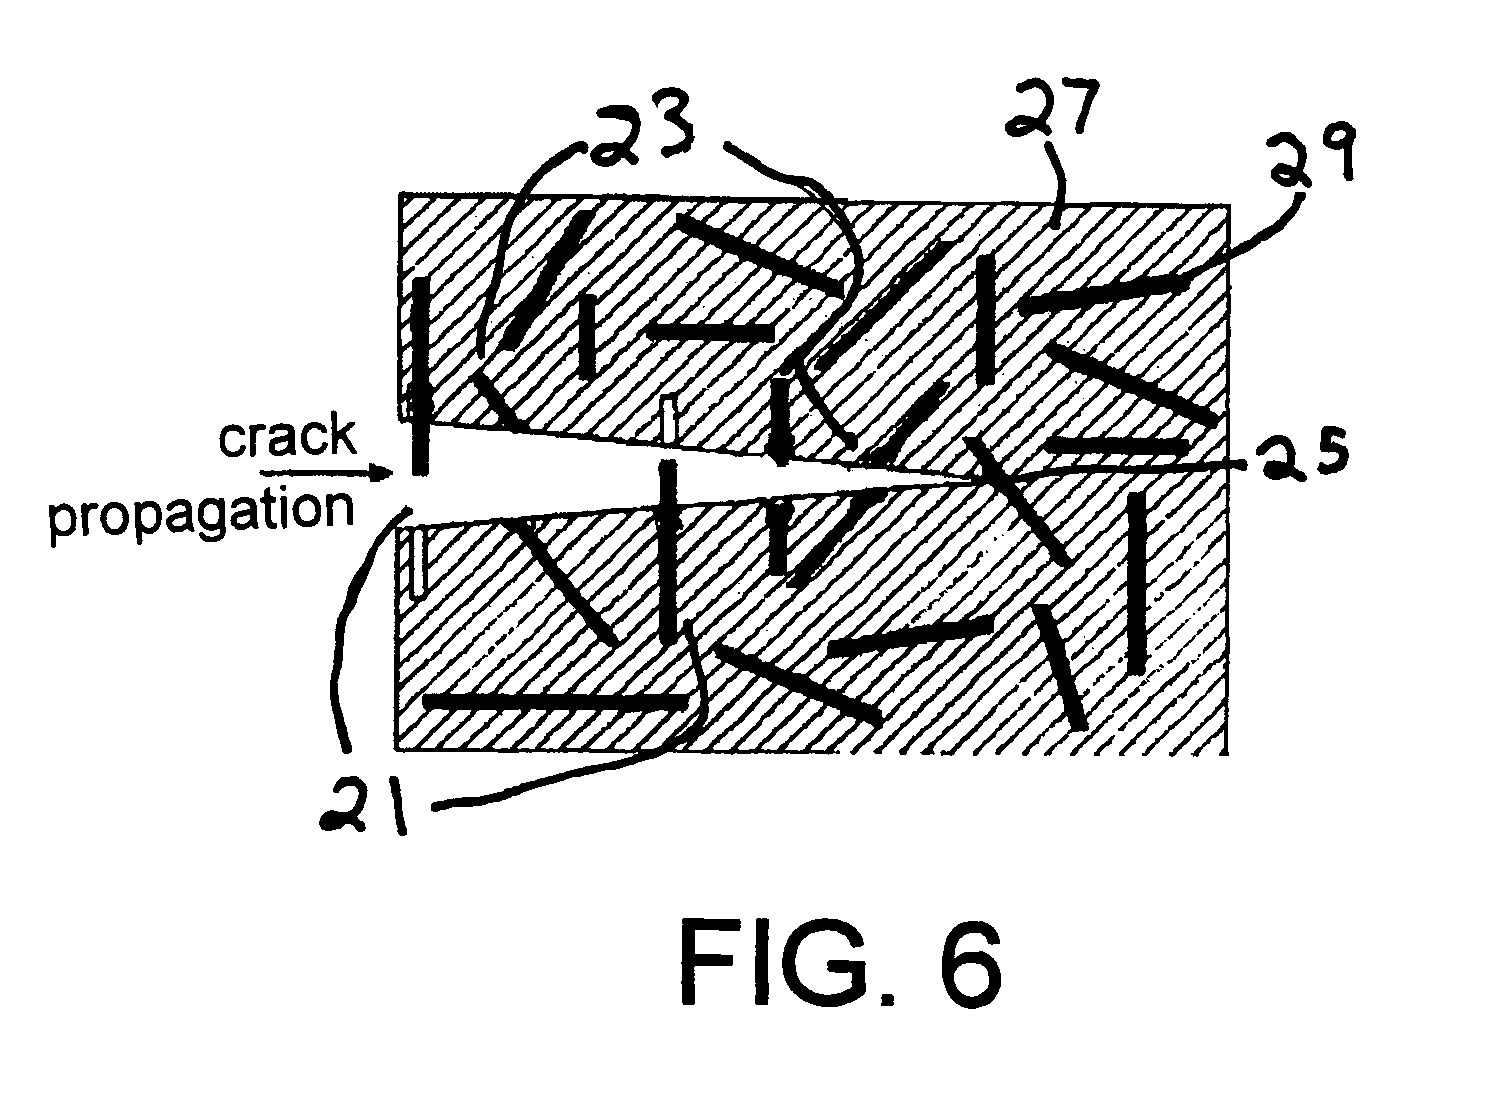 Multifunctional cementitious nanocomposite material and methods of making the same